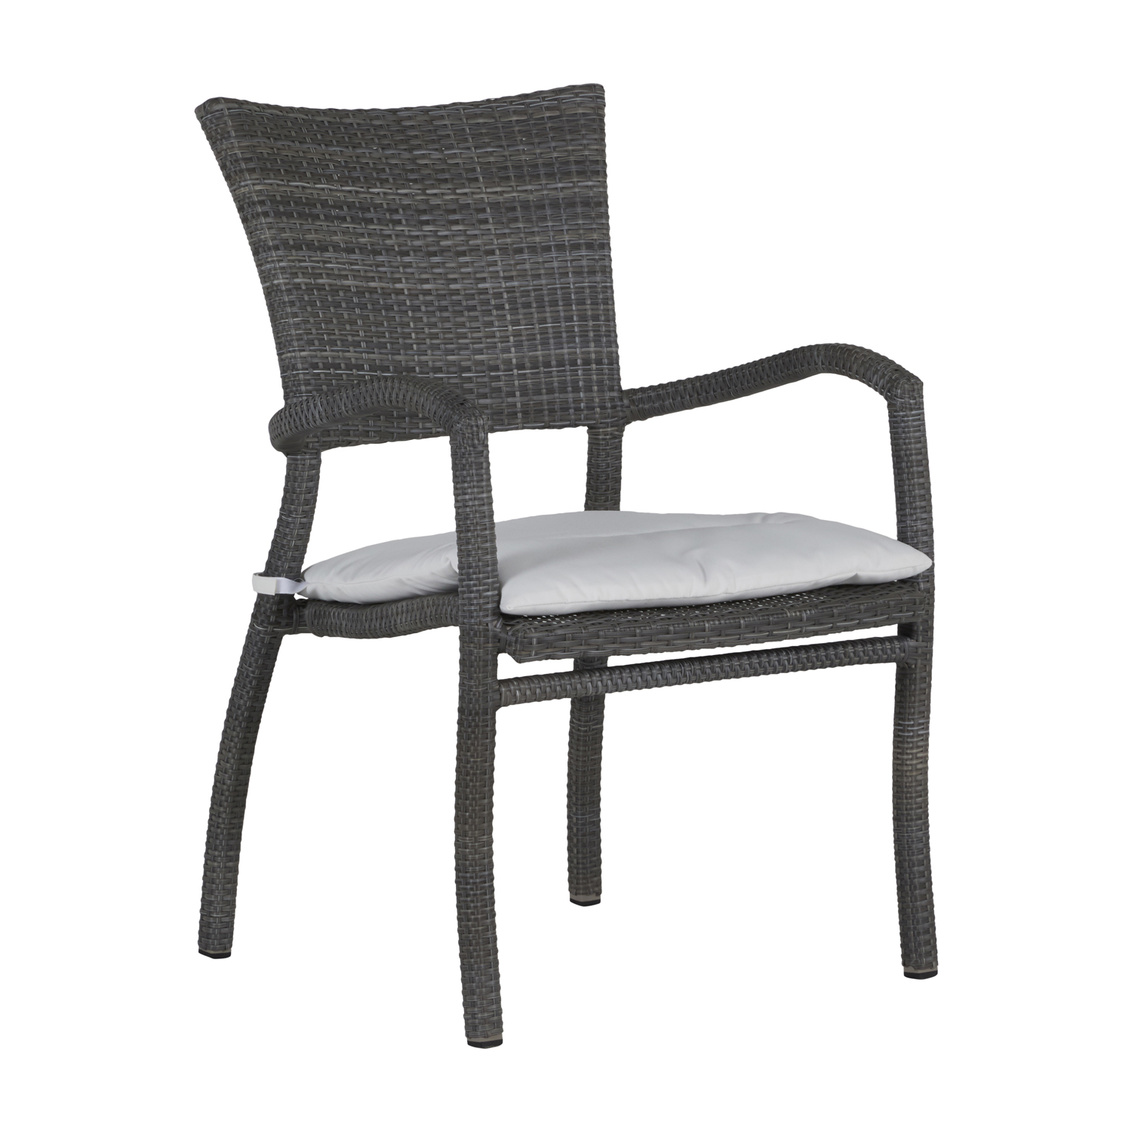 skye arm chair in slate grey – frame only product image